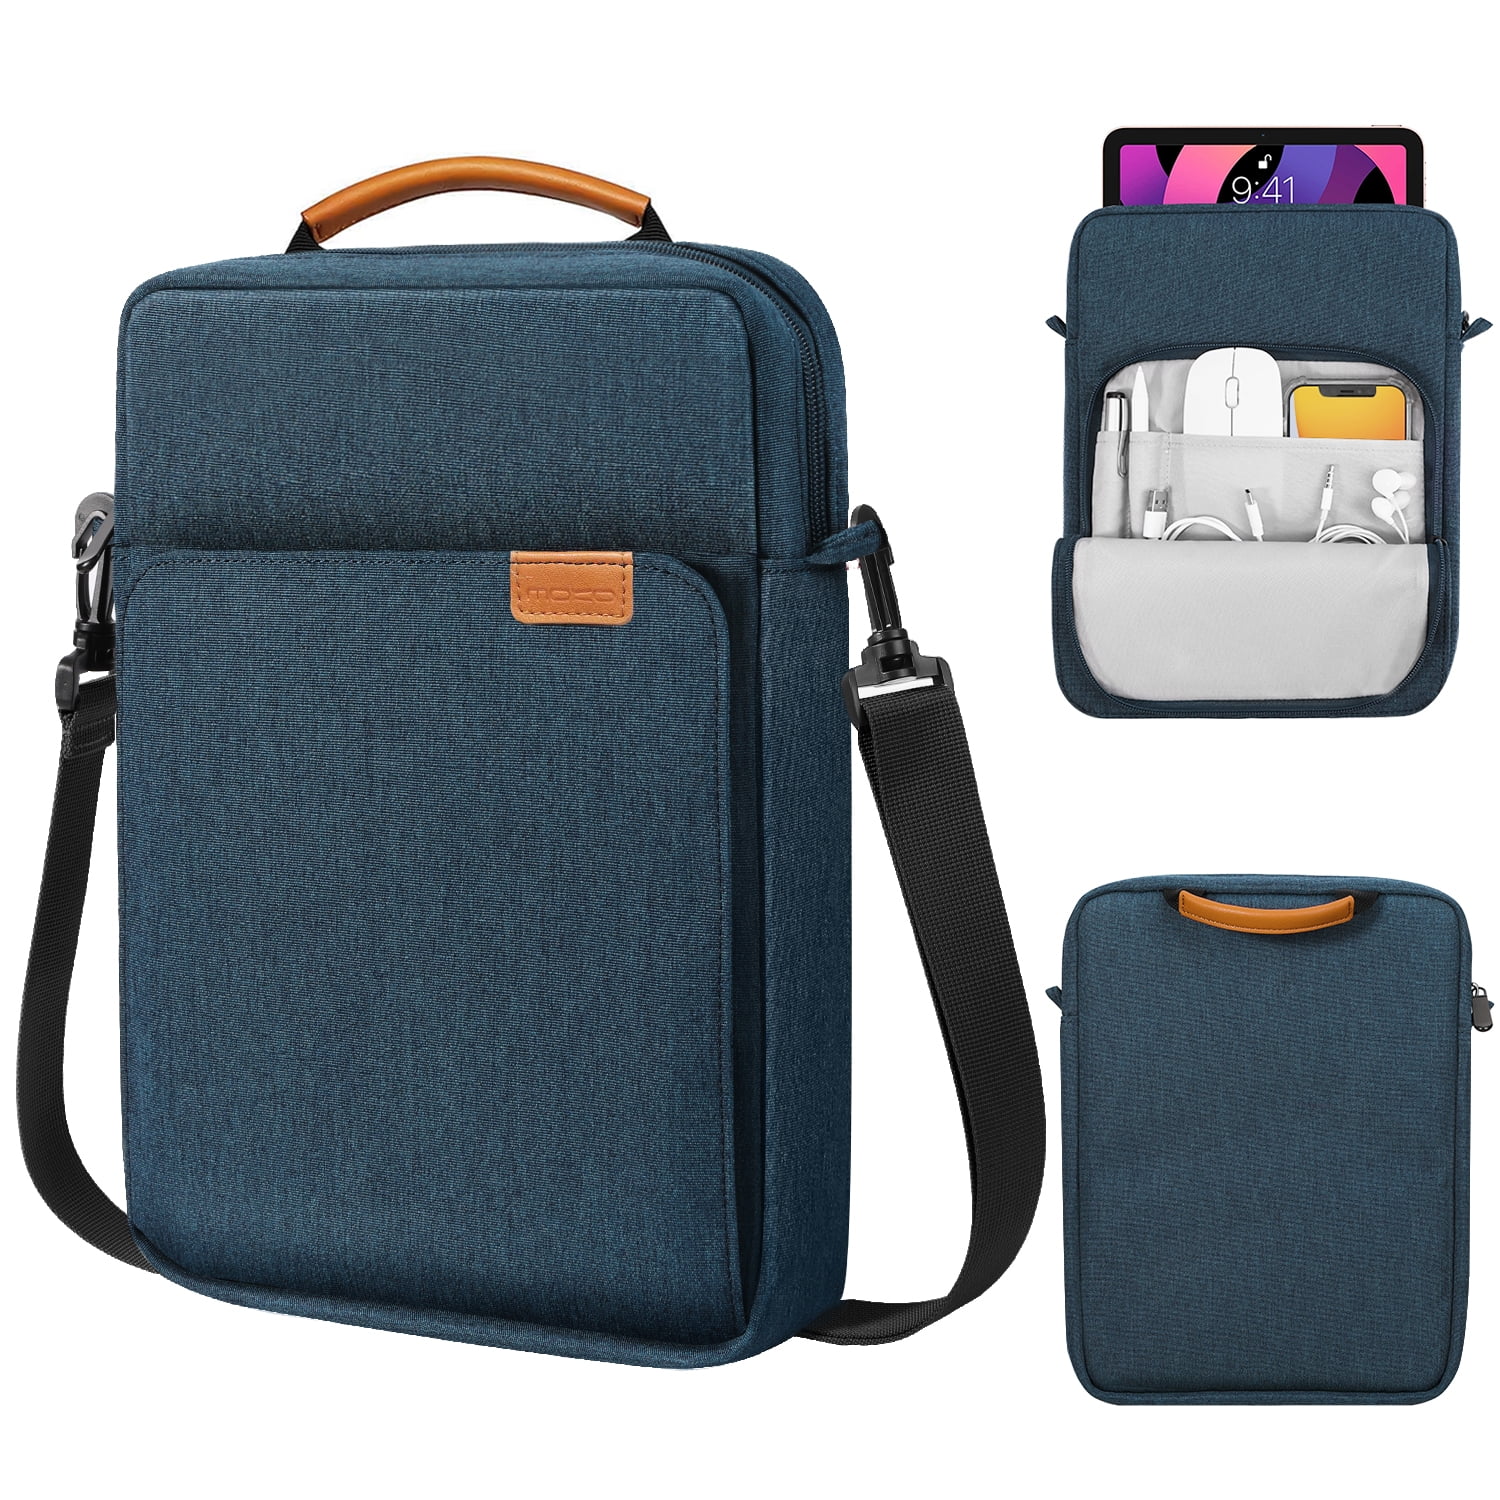 Carrying case for iPad Pro 12.9 with shoulder strap, Gen. 1-3. Italy.